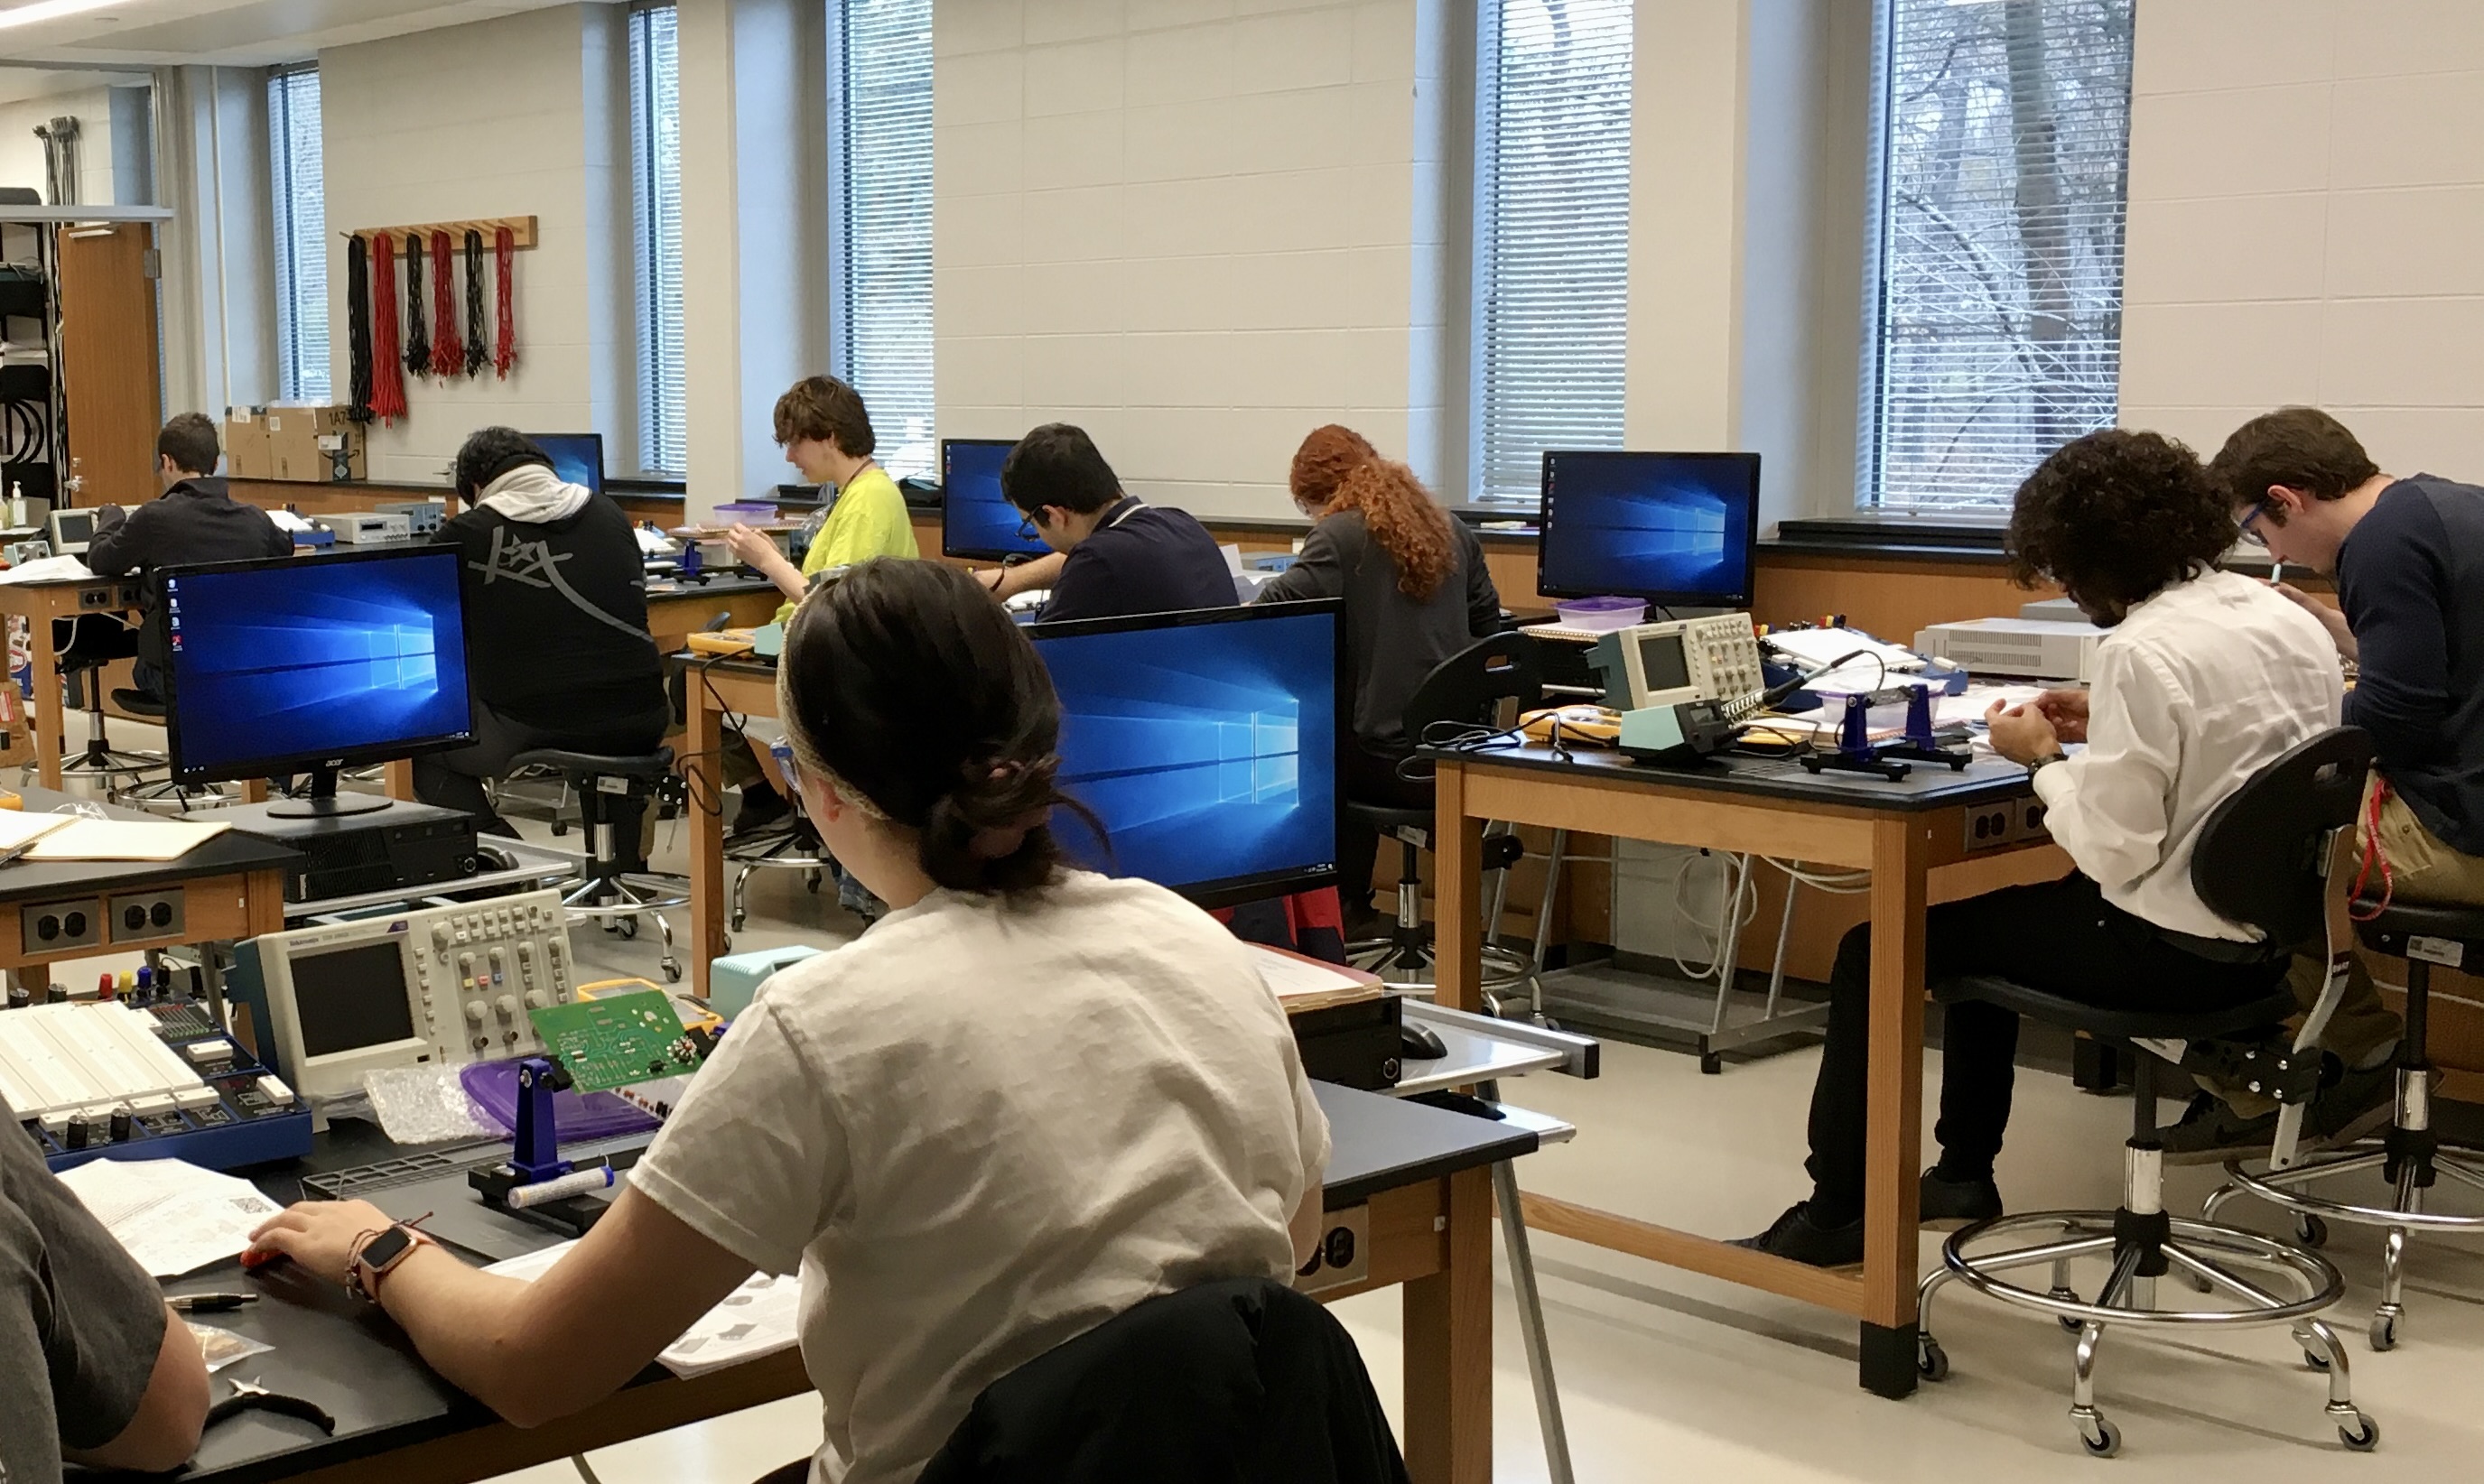 students soldering in electronics lab